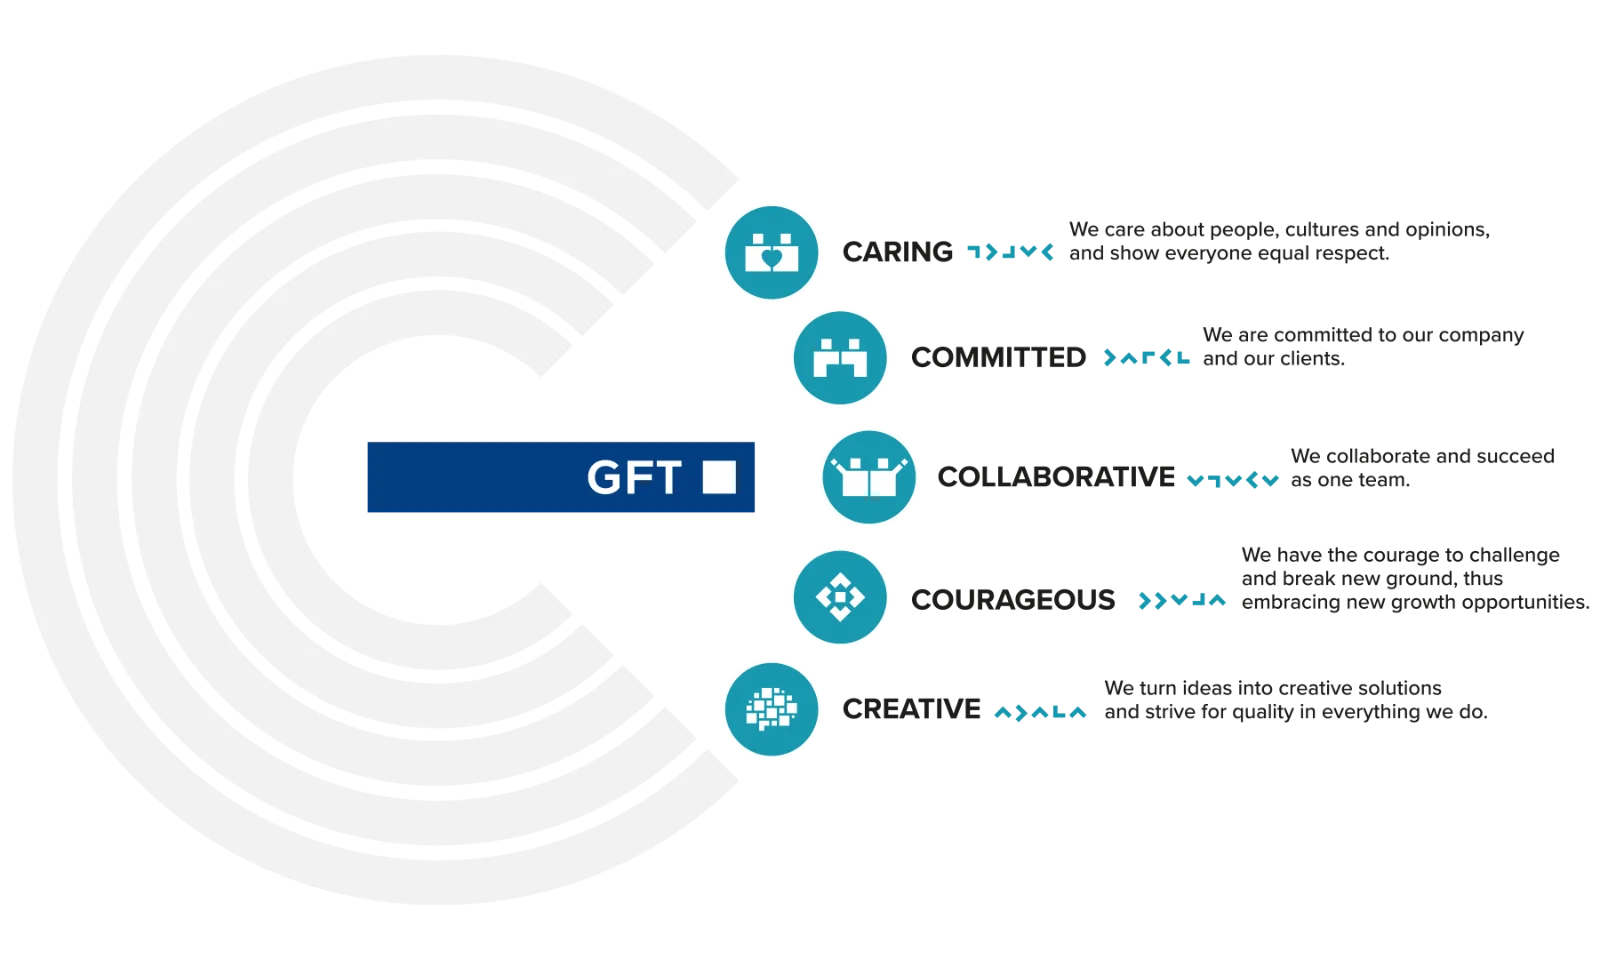 GFT-Values-infographic